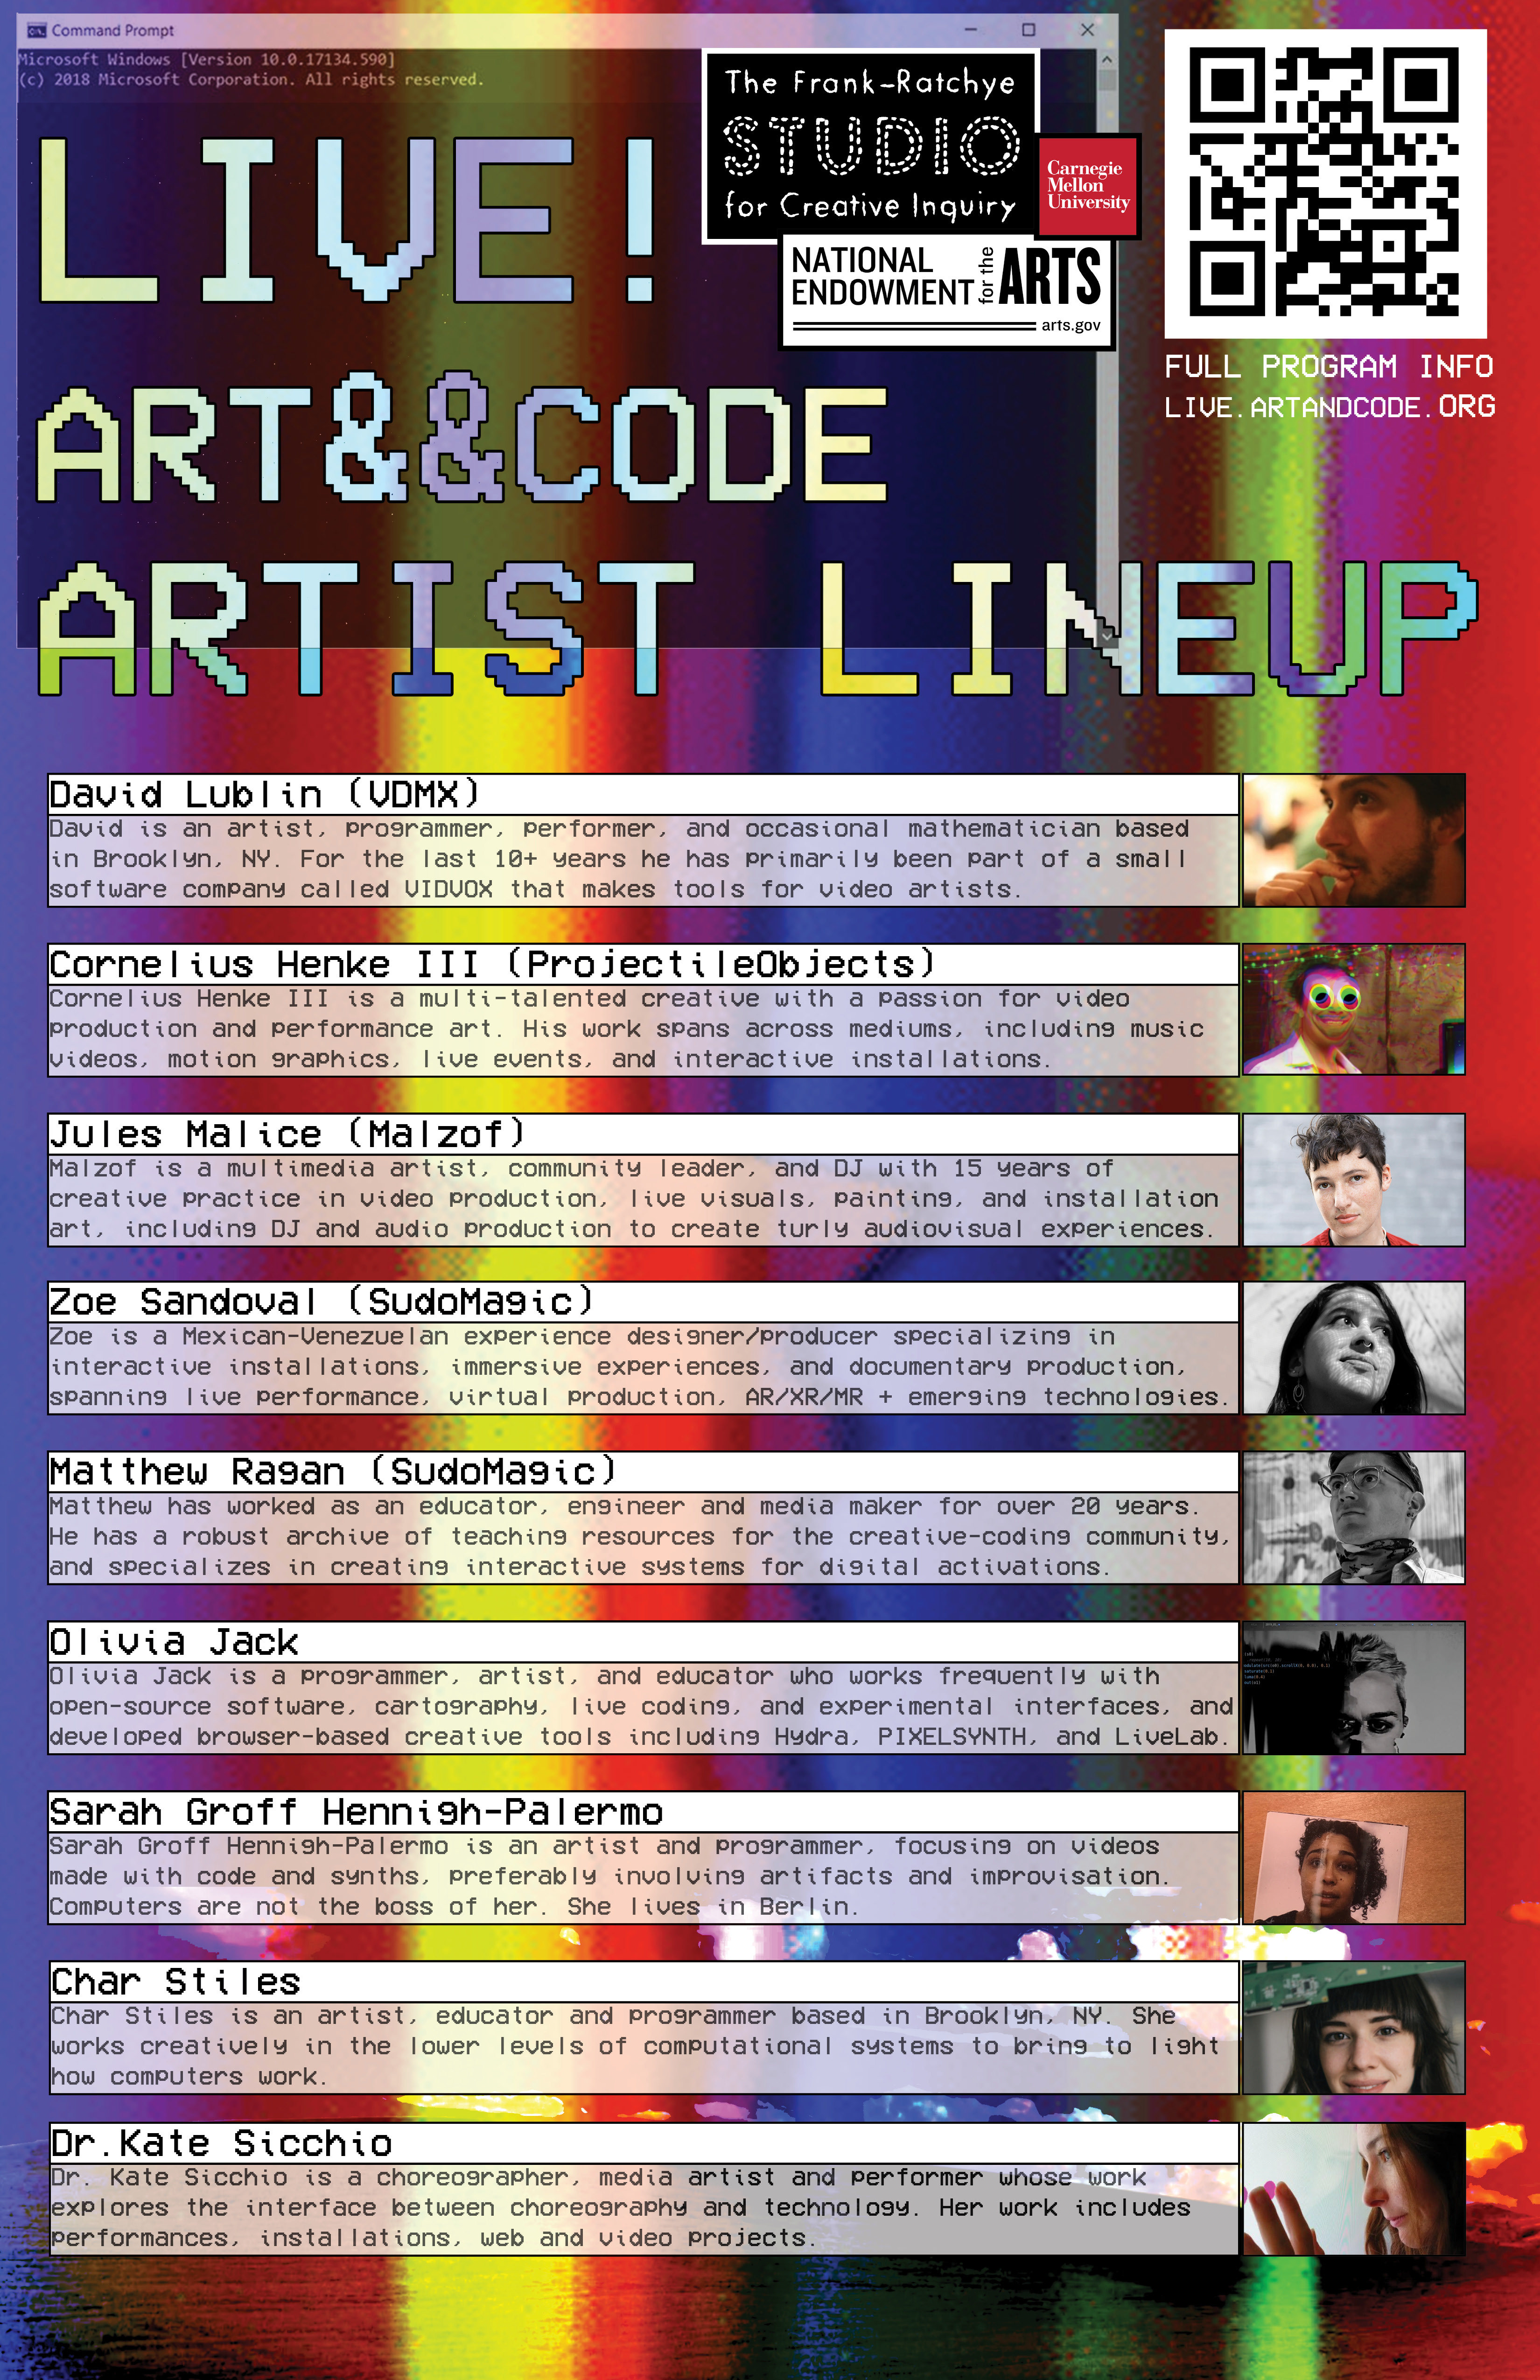 Artist LineUp which is copied at the bottom of this page